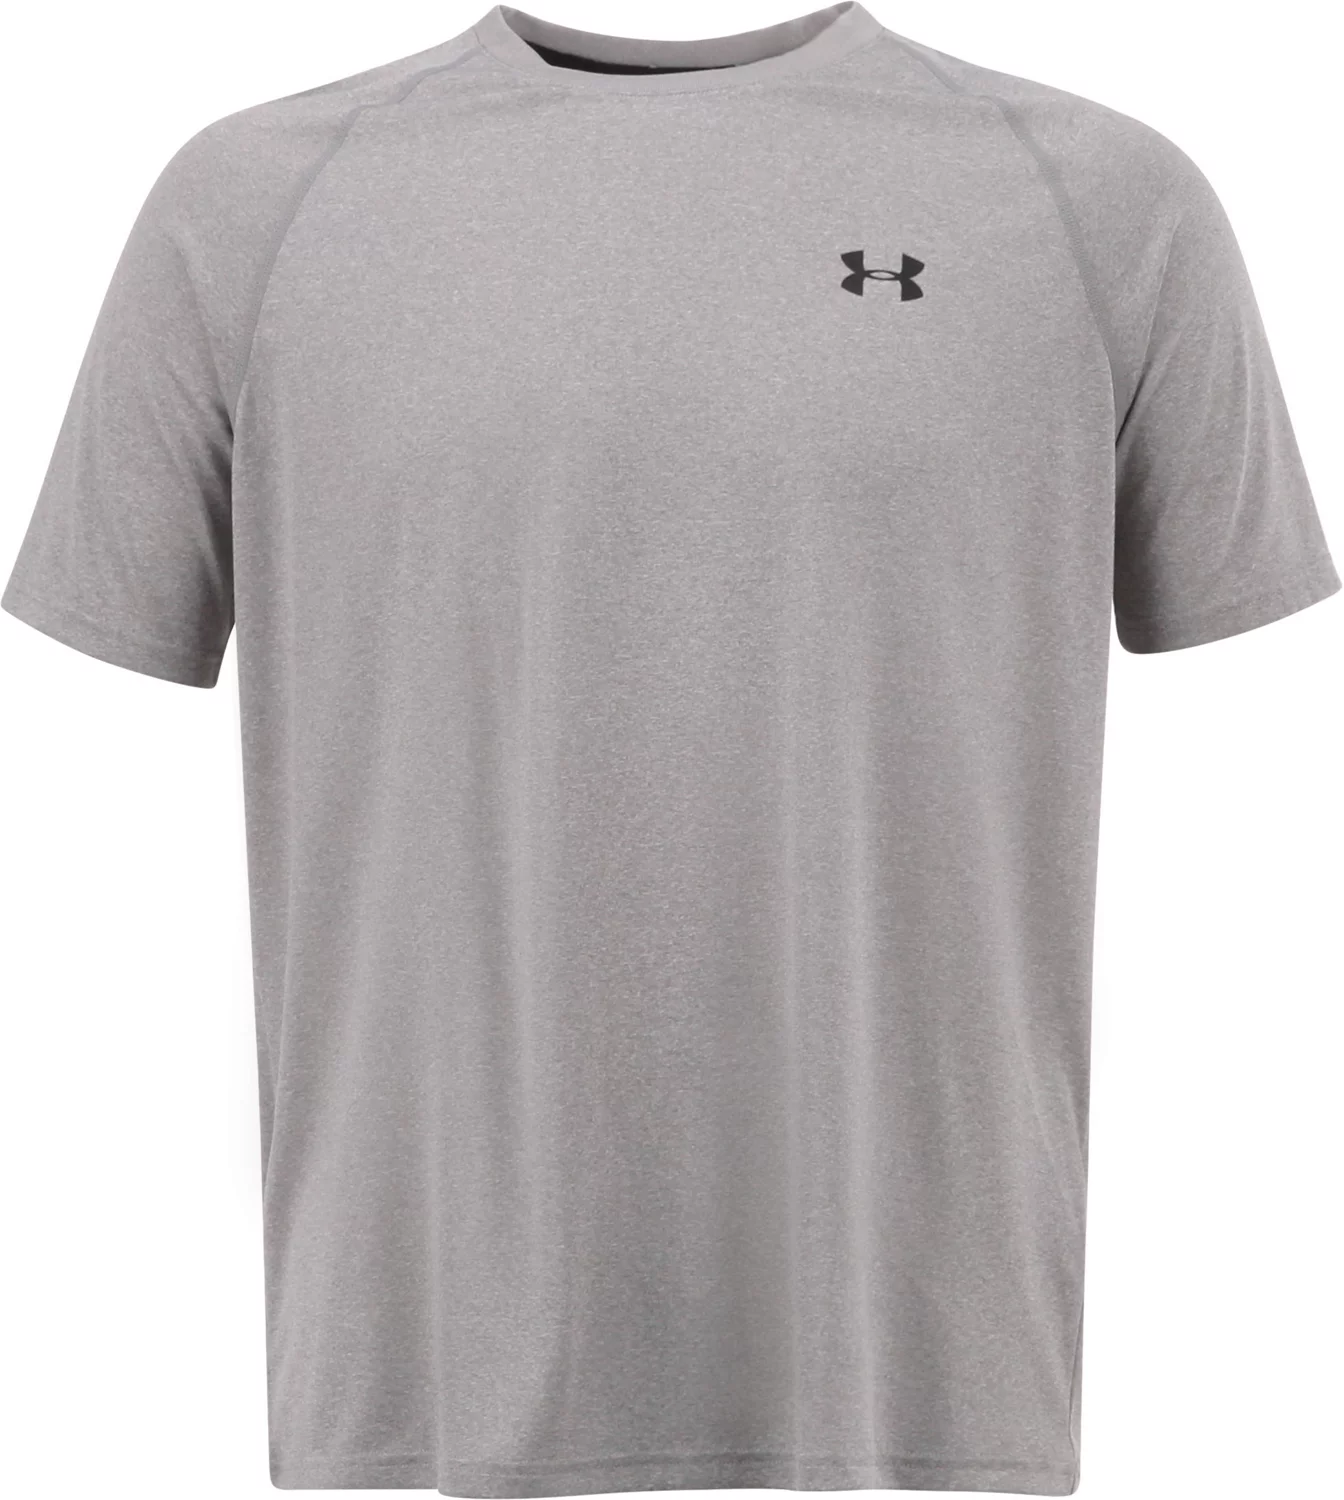 where can i find under armour clothing